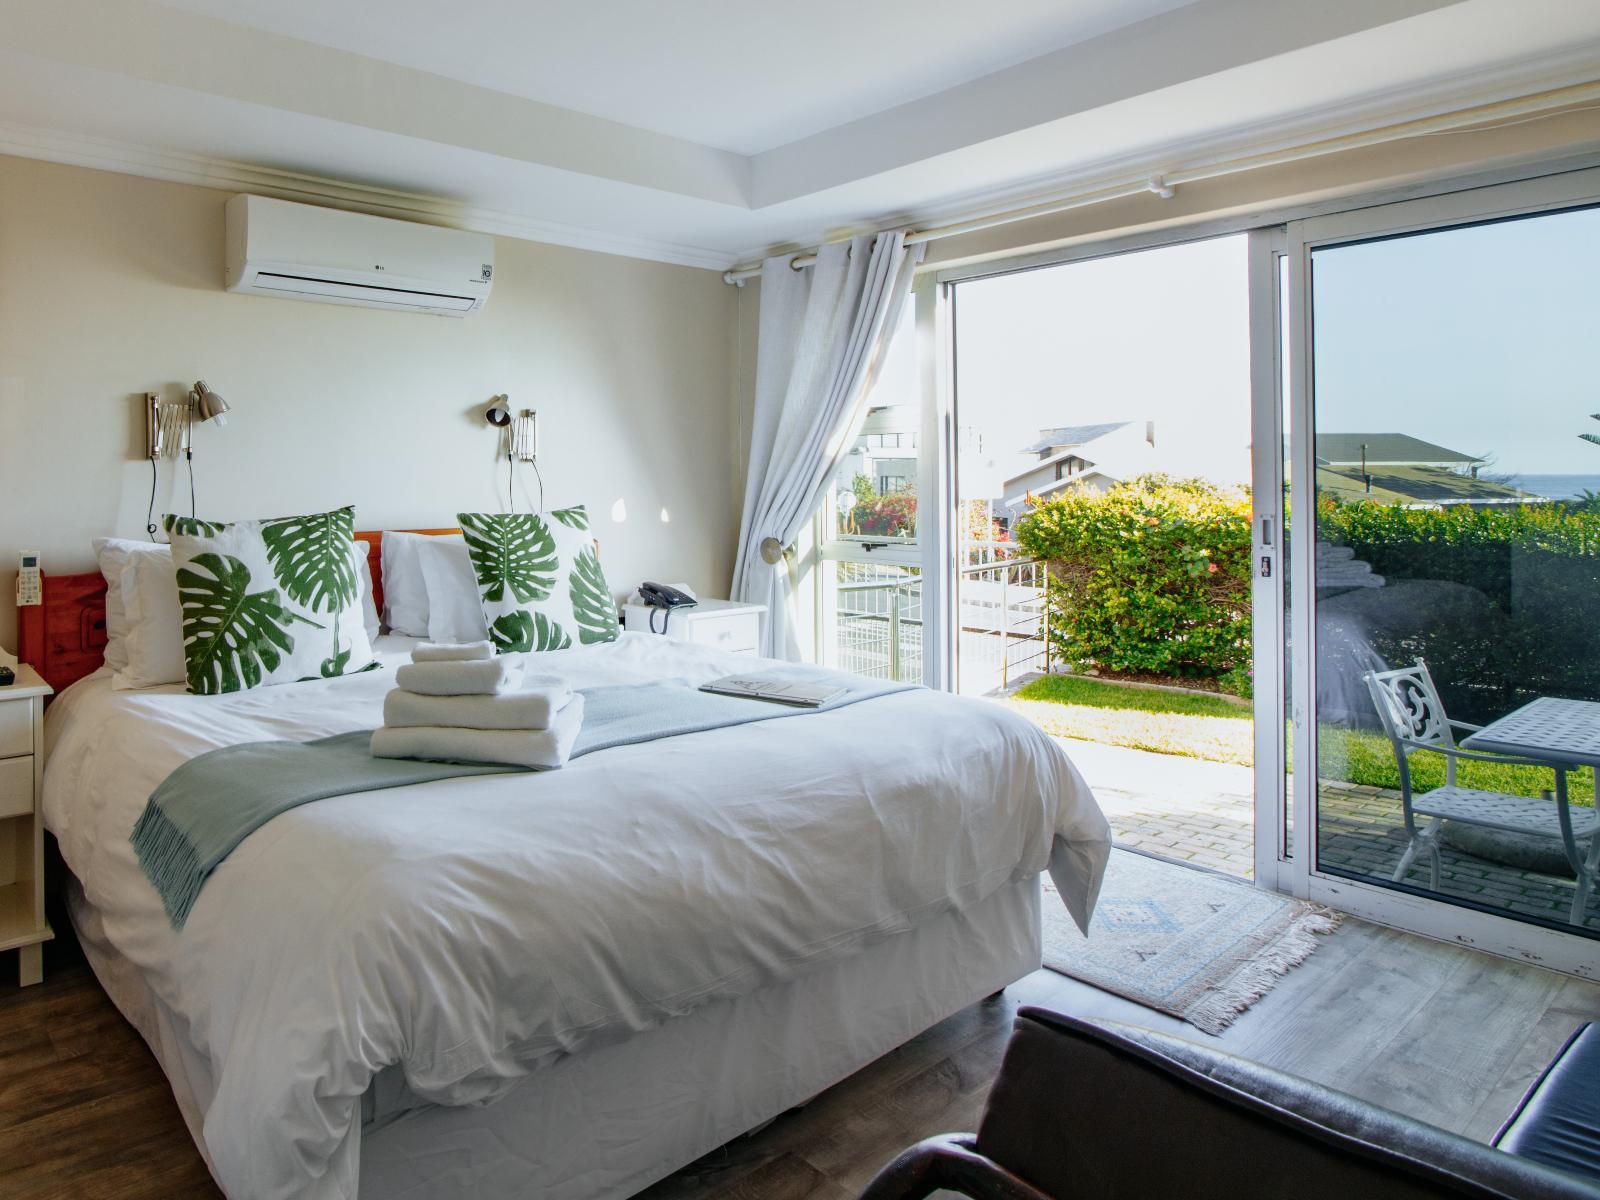 Blaauw Village Luxury Boutique Guest House Bloubergstrand Blouberg Western Cape South Africa House, Building, Architecture, Bedroom